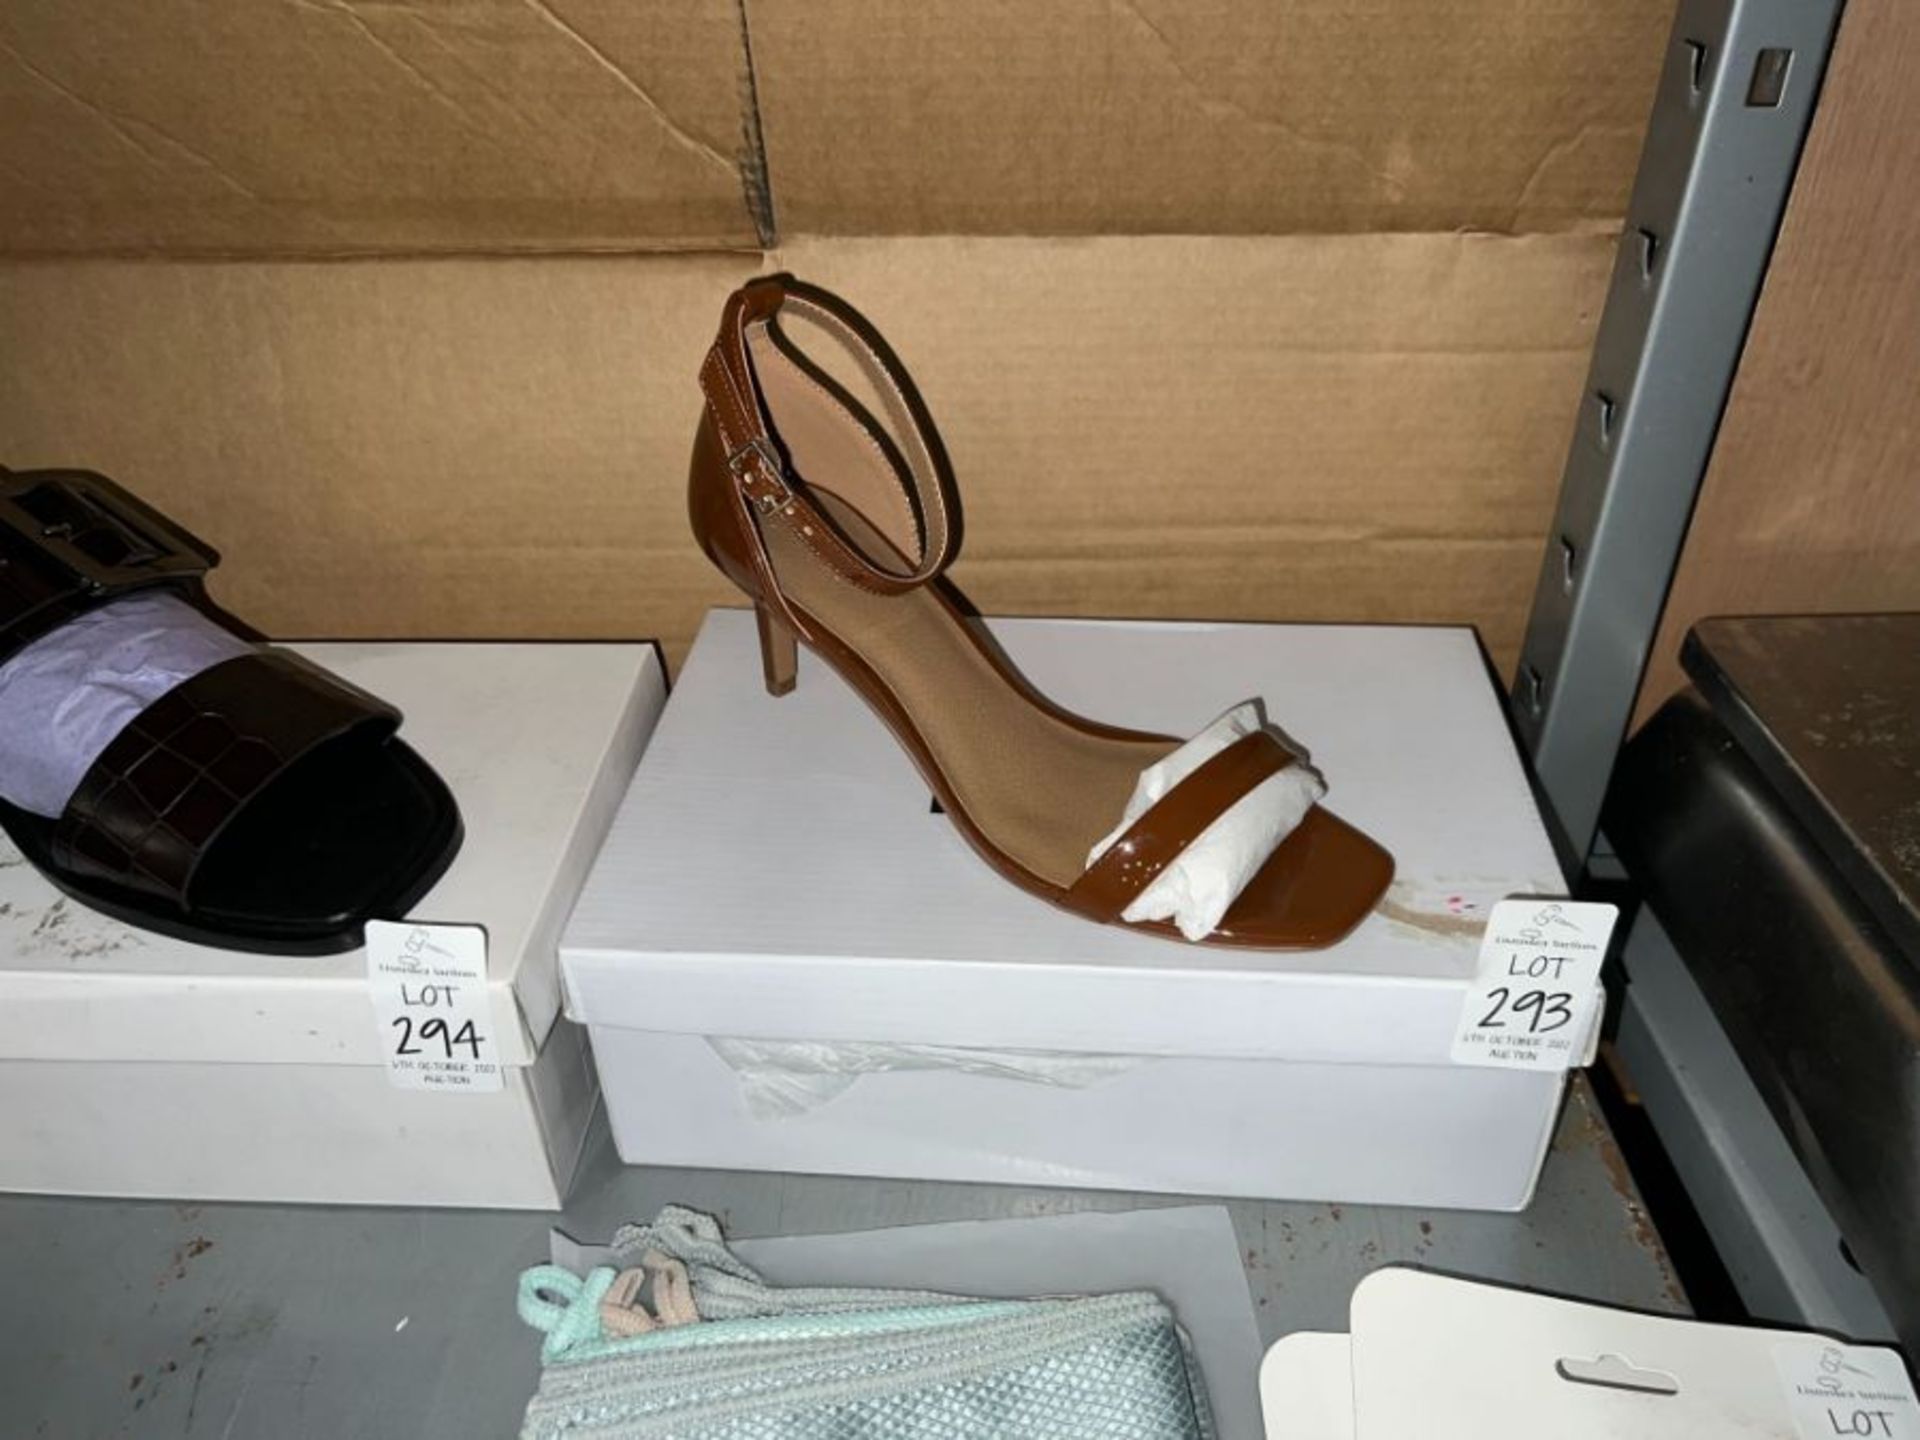 PAIR OF FIND. BROWN HEELS (SIZE 6) (NEW)